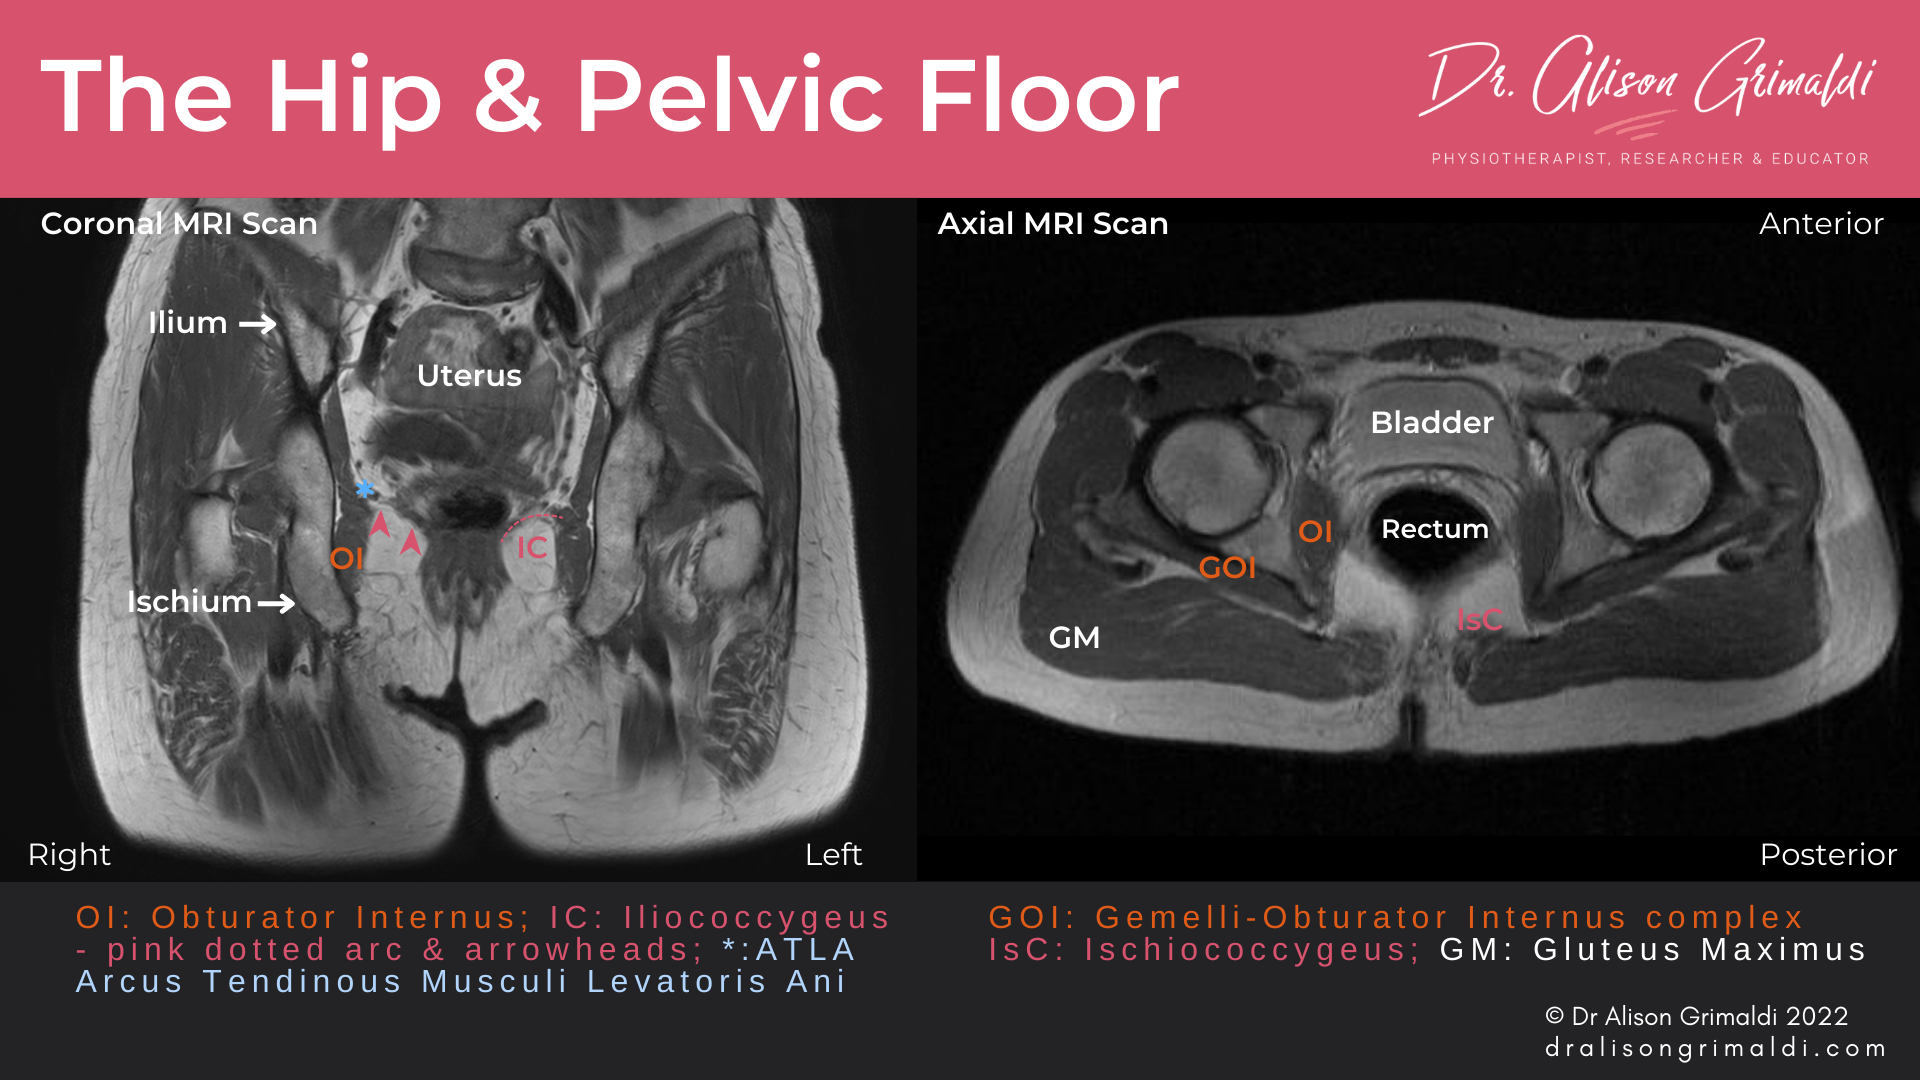 MRI Scans showing the anatomical relationships of the hip and pelvic floor